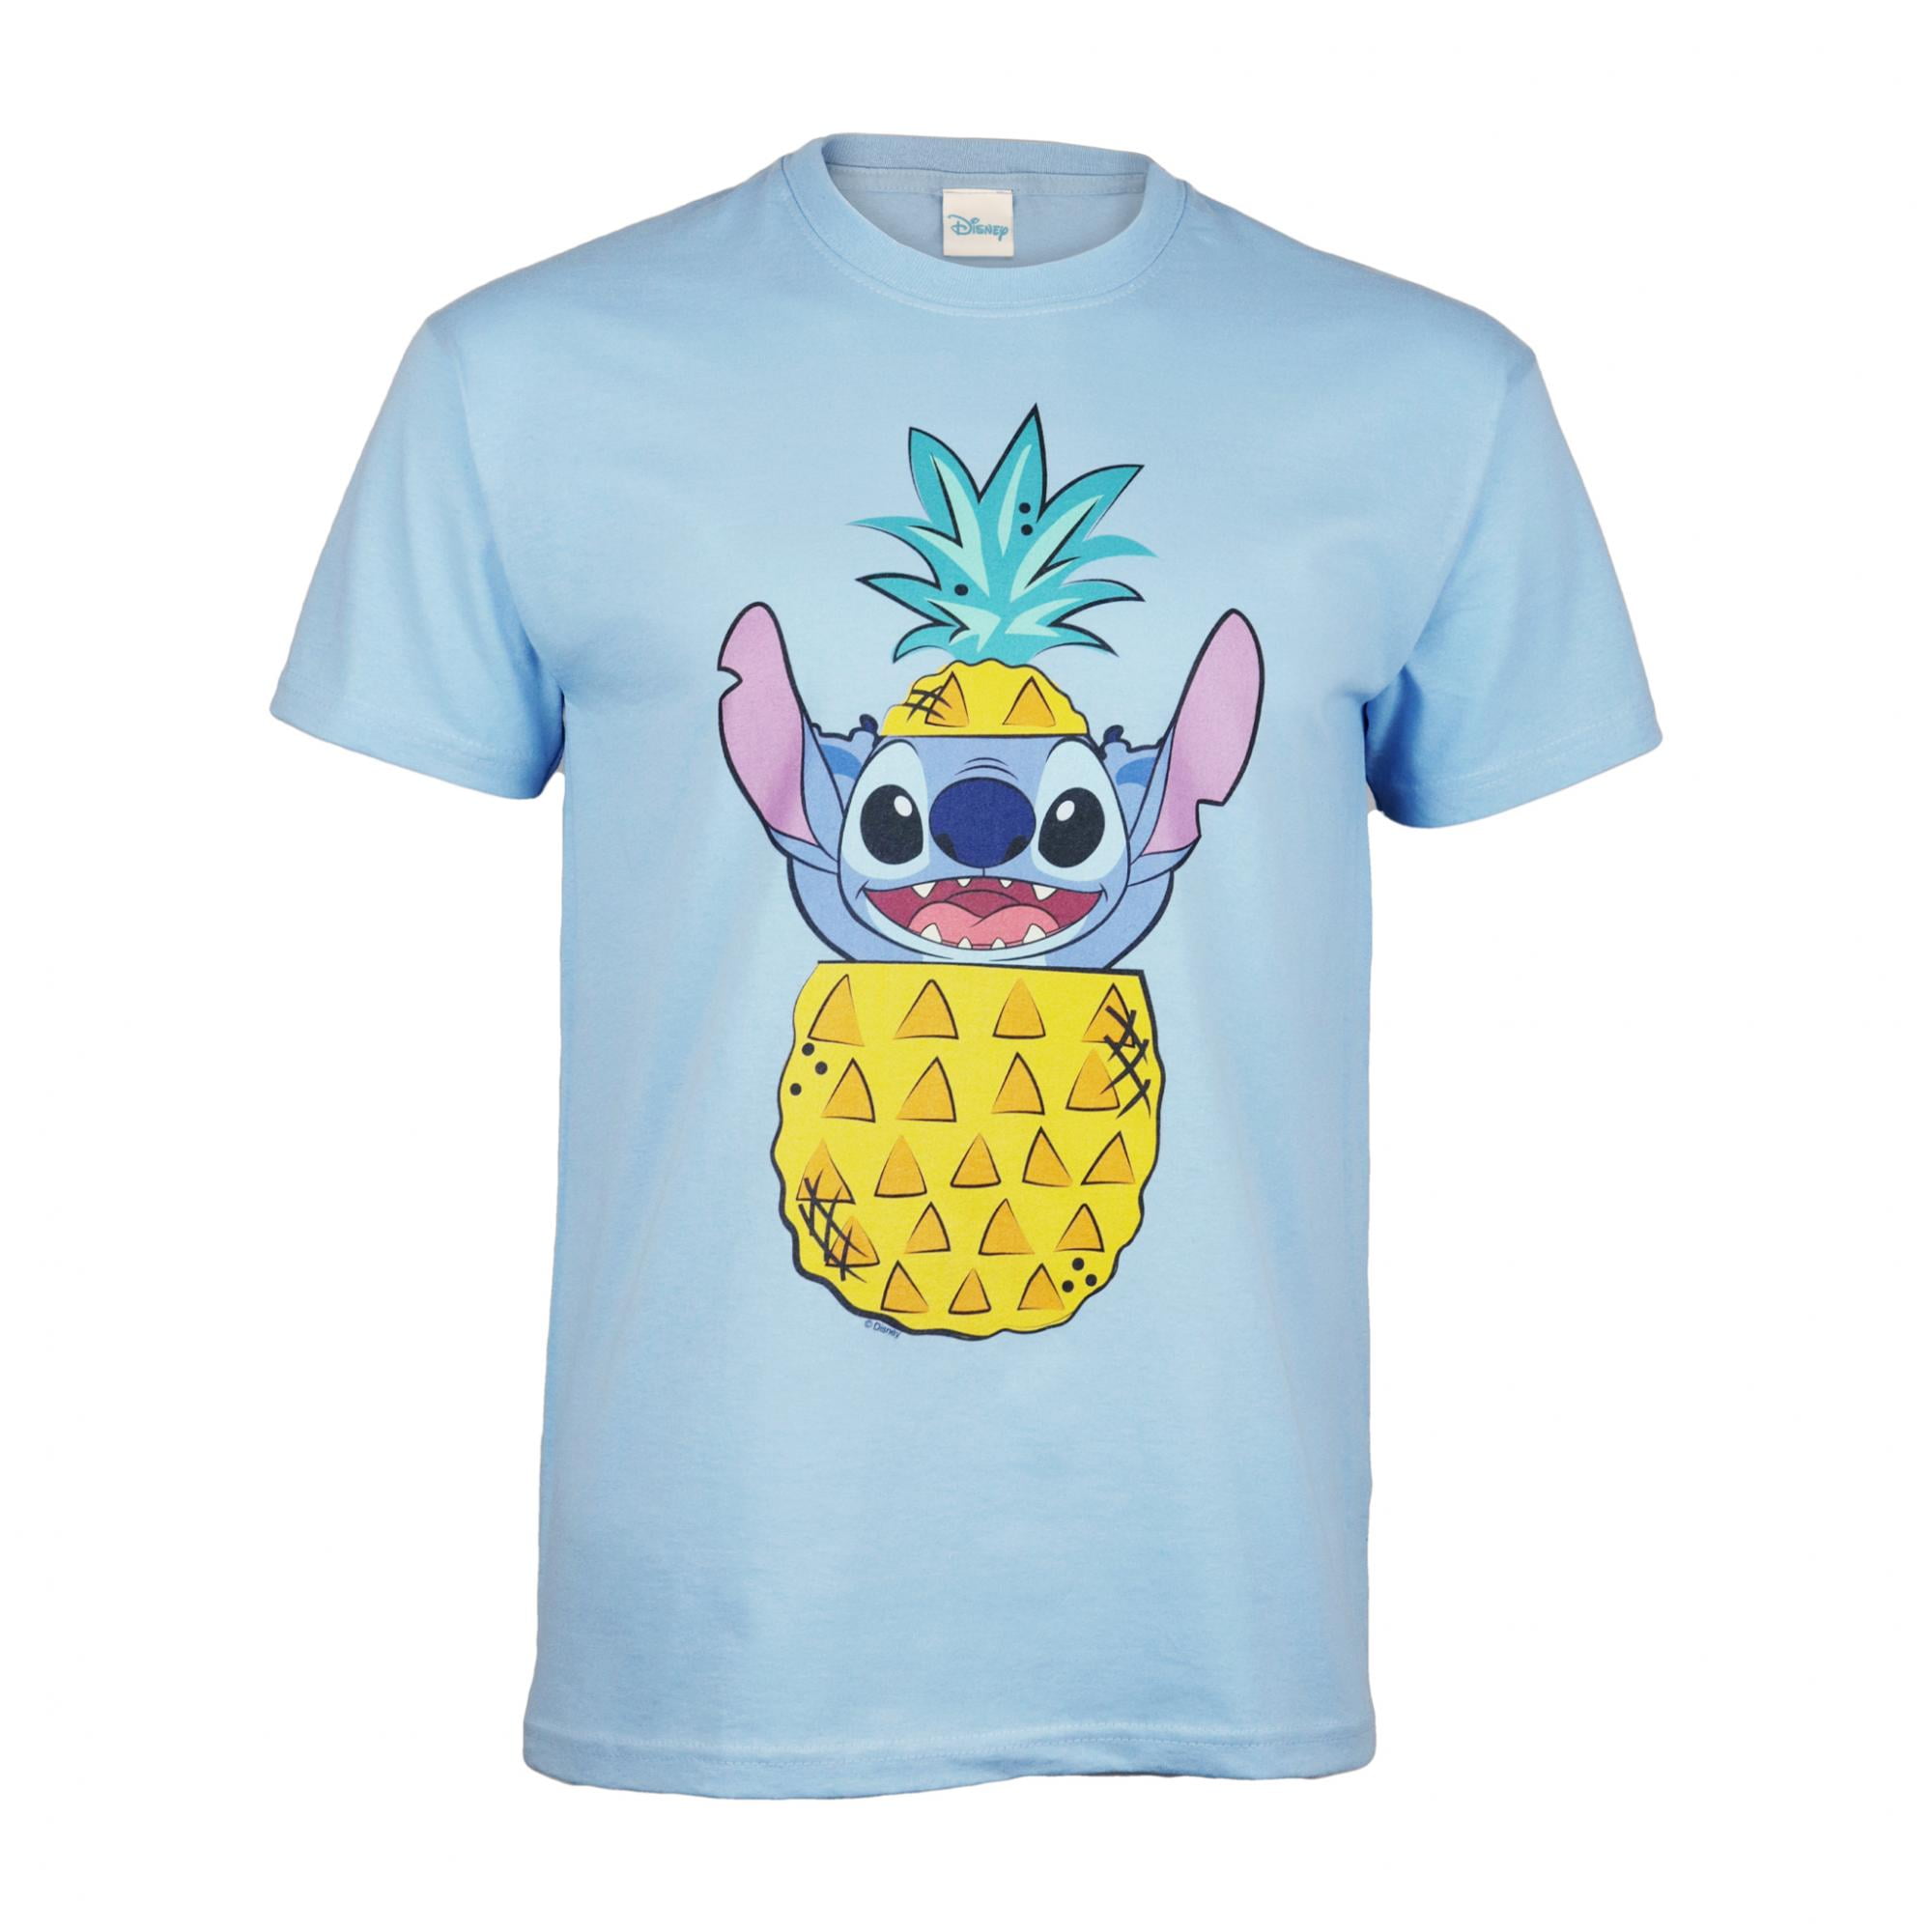 Pineapple Shirt Pineapple Graphic Cute T Shirt Womens Fruits Lover Casual Short Sleeve Tops